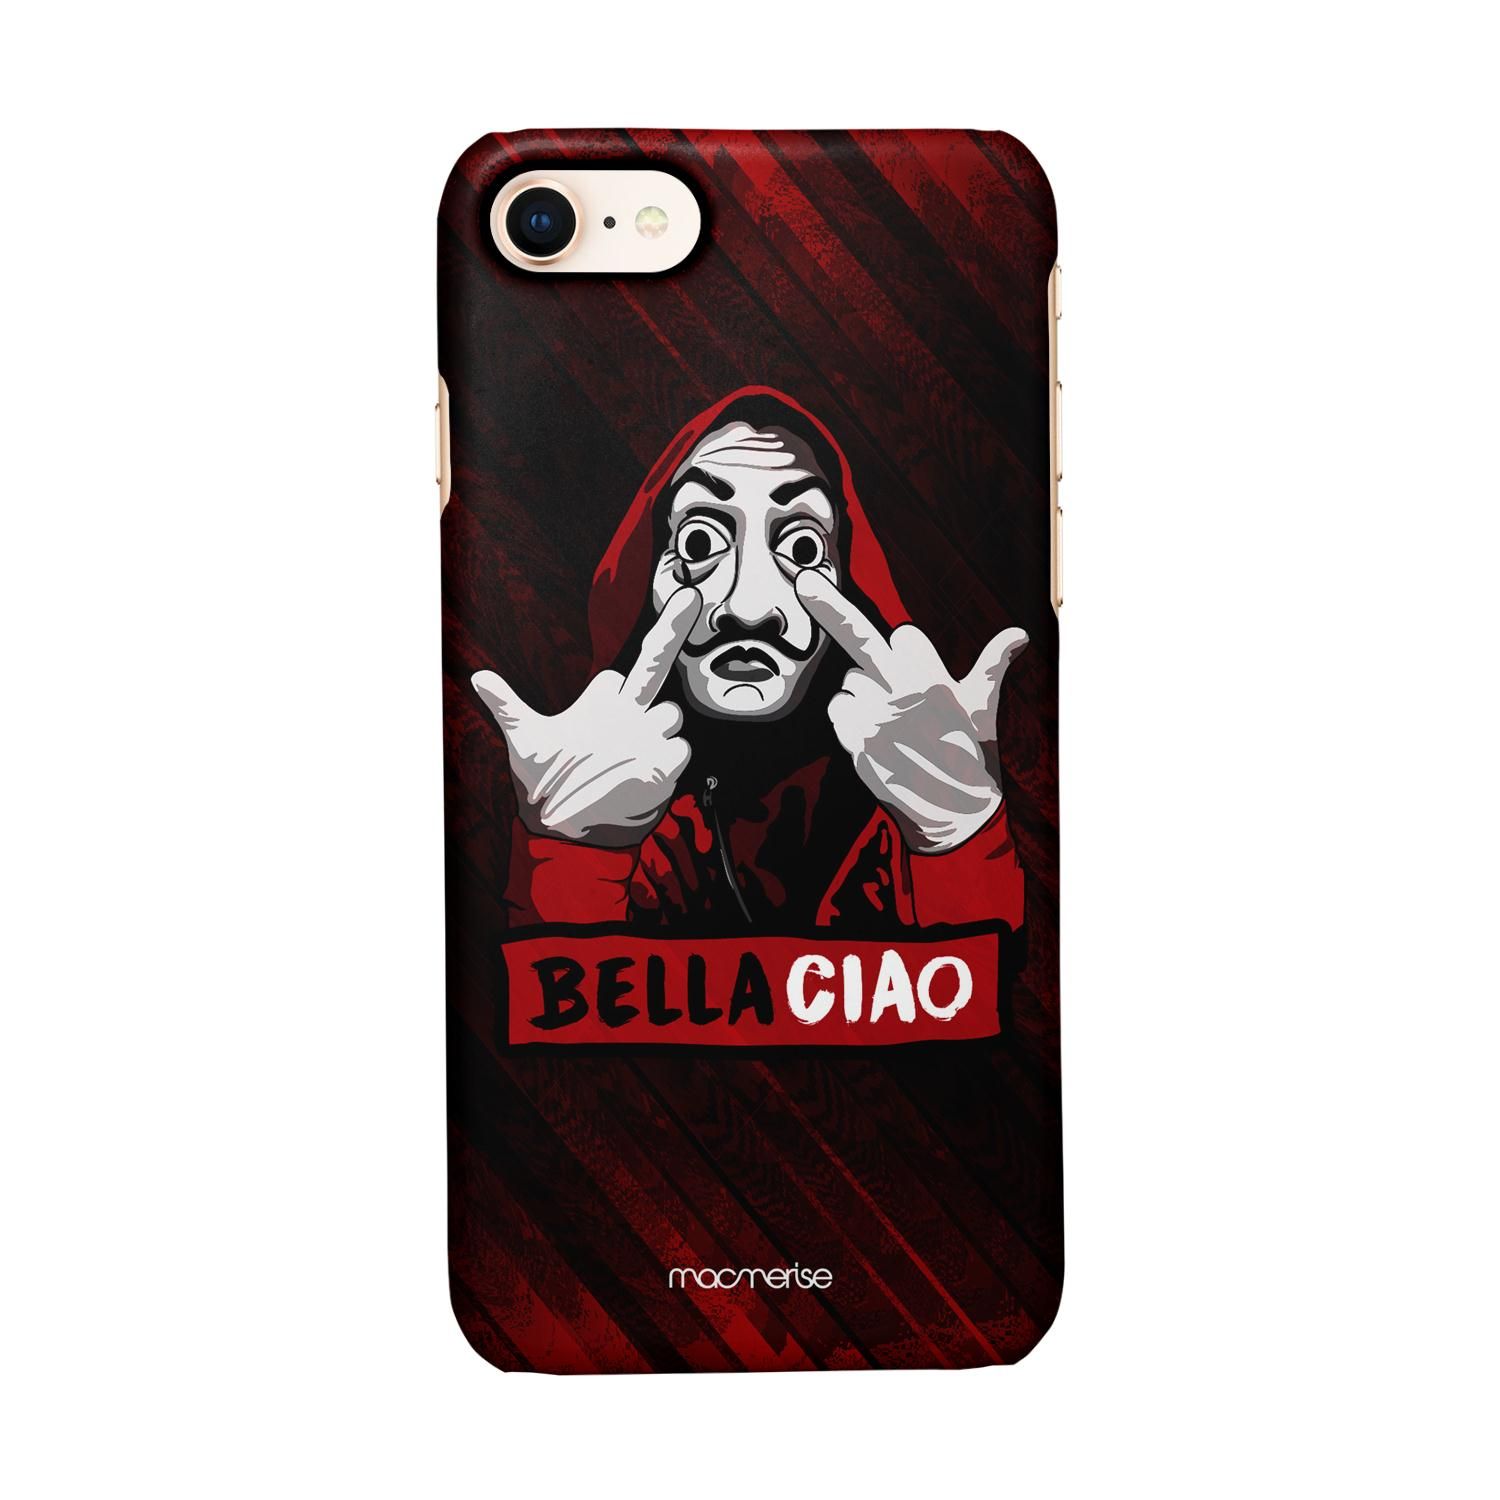 Buy Bella Ciao - Sleek Phone Case for iPhone 7 Online